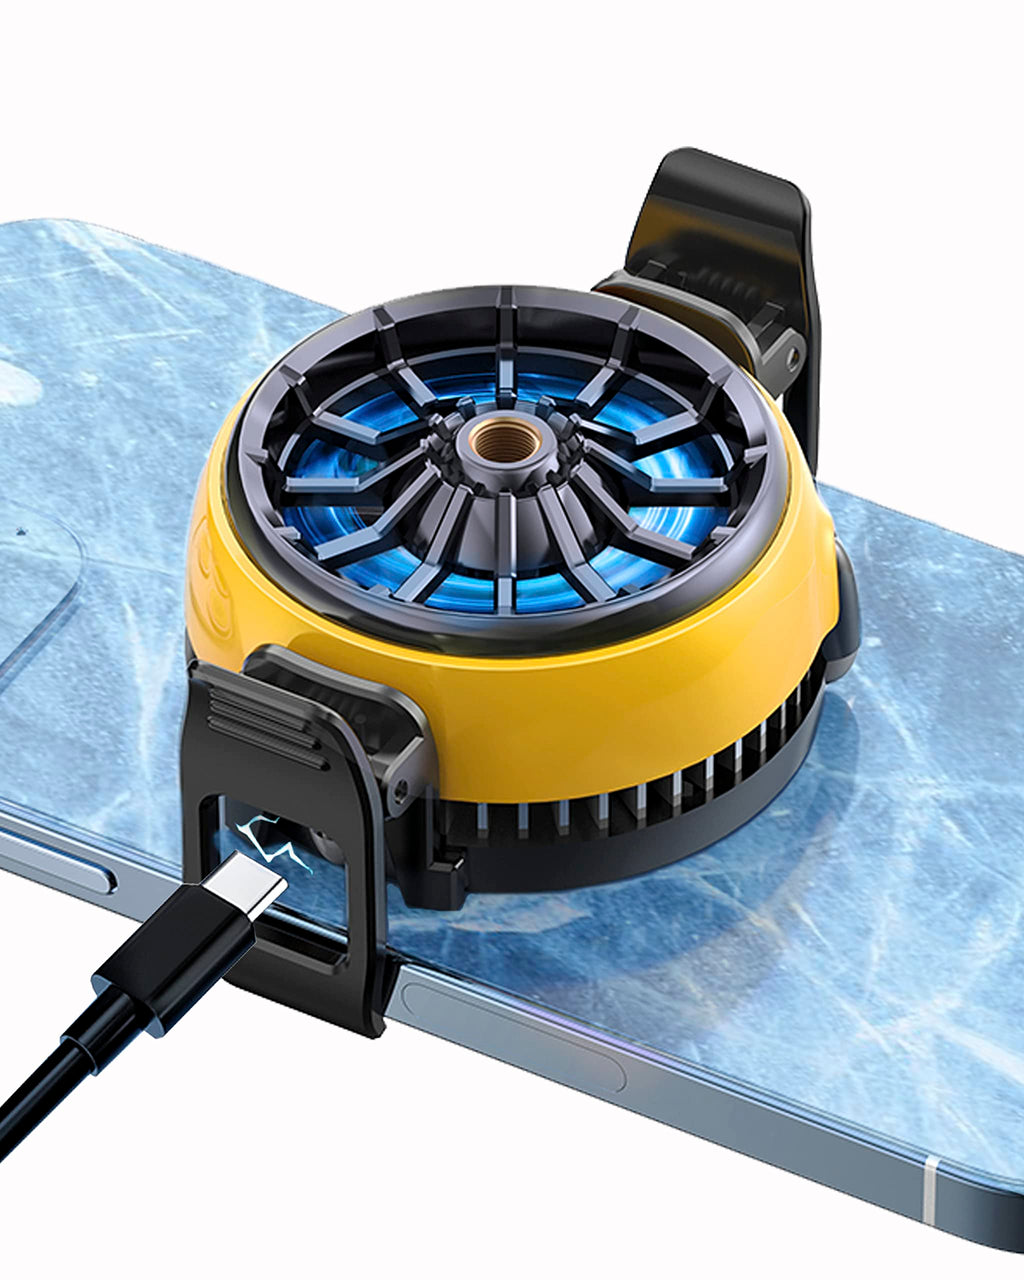  [AUSTRALIA] - ACEDAYS Phone Cooler, Cell Phone Radiator with Semi-Conductor Cooling Chip, Universal Phone Cooling Fan for Mobile Gaming,Tiktok Live Streaming, Outdoor Vlog. Black/Yellow